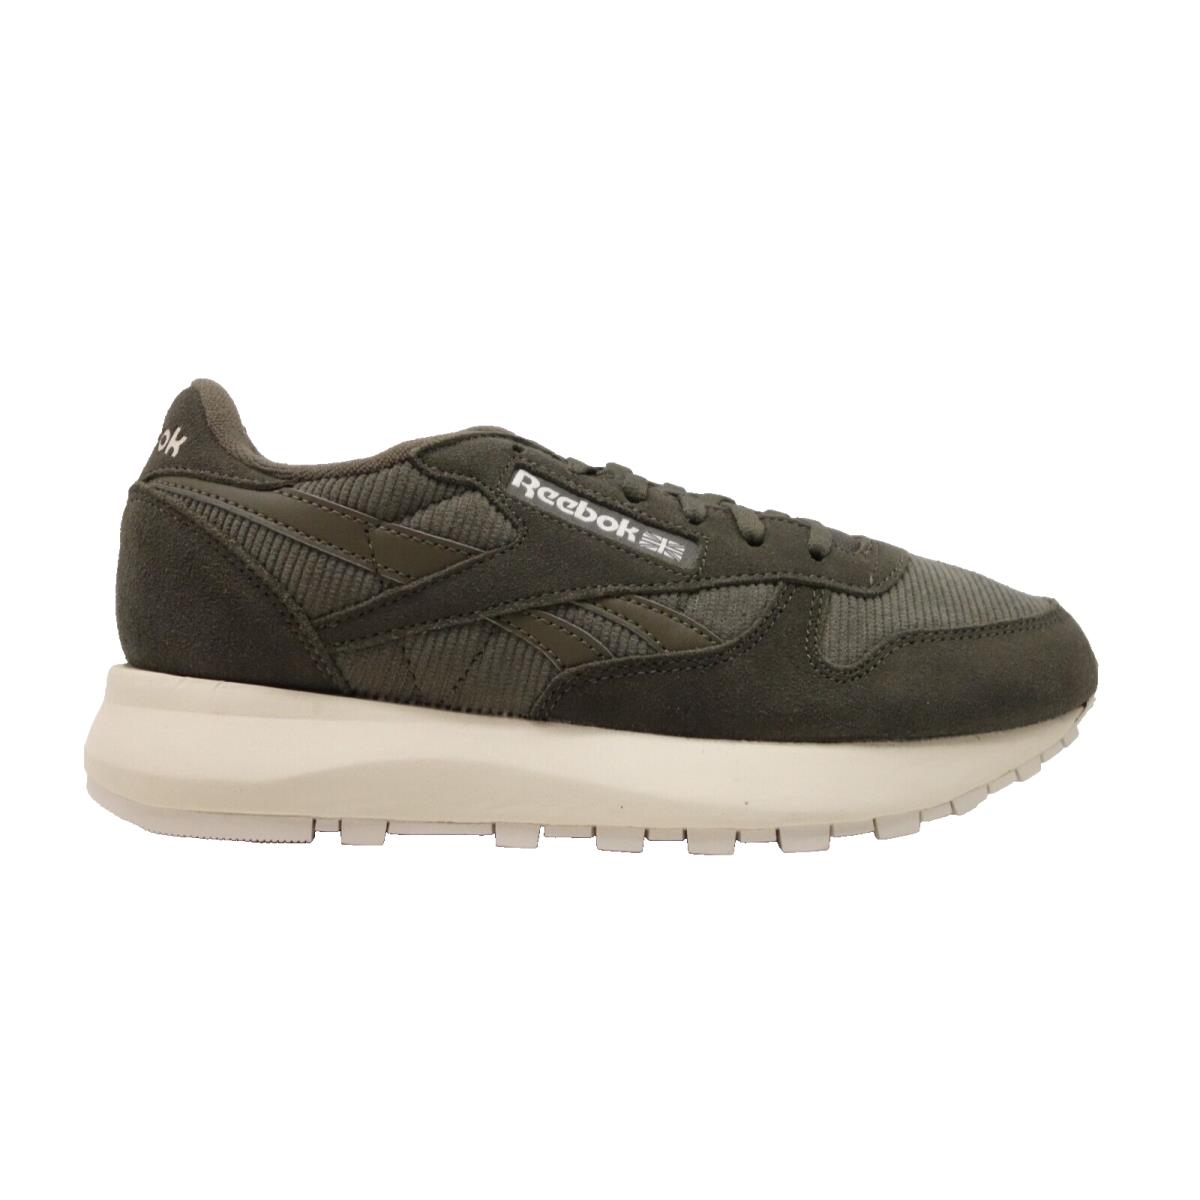 Reebok Womens Olive Green Classic Leather SP Athletic Running Shoes US 7 EU 37.5